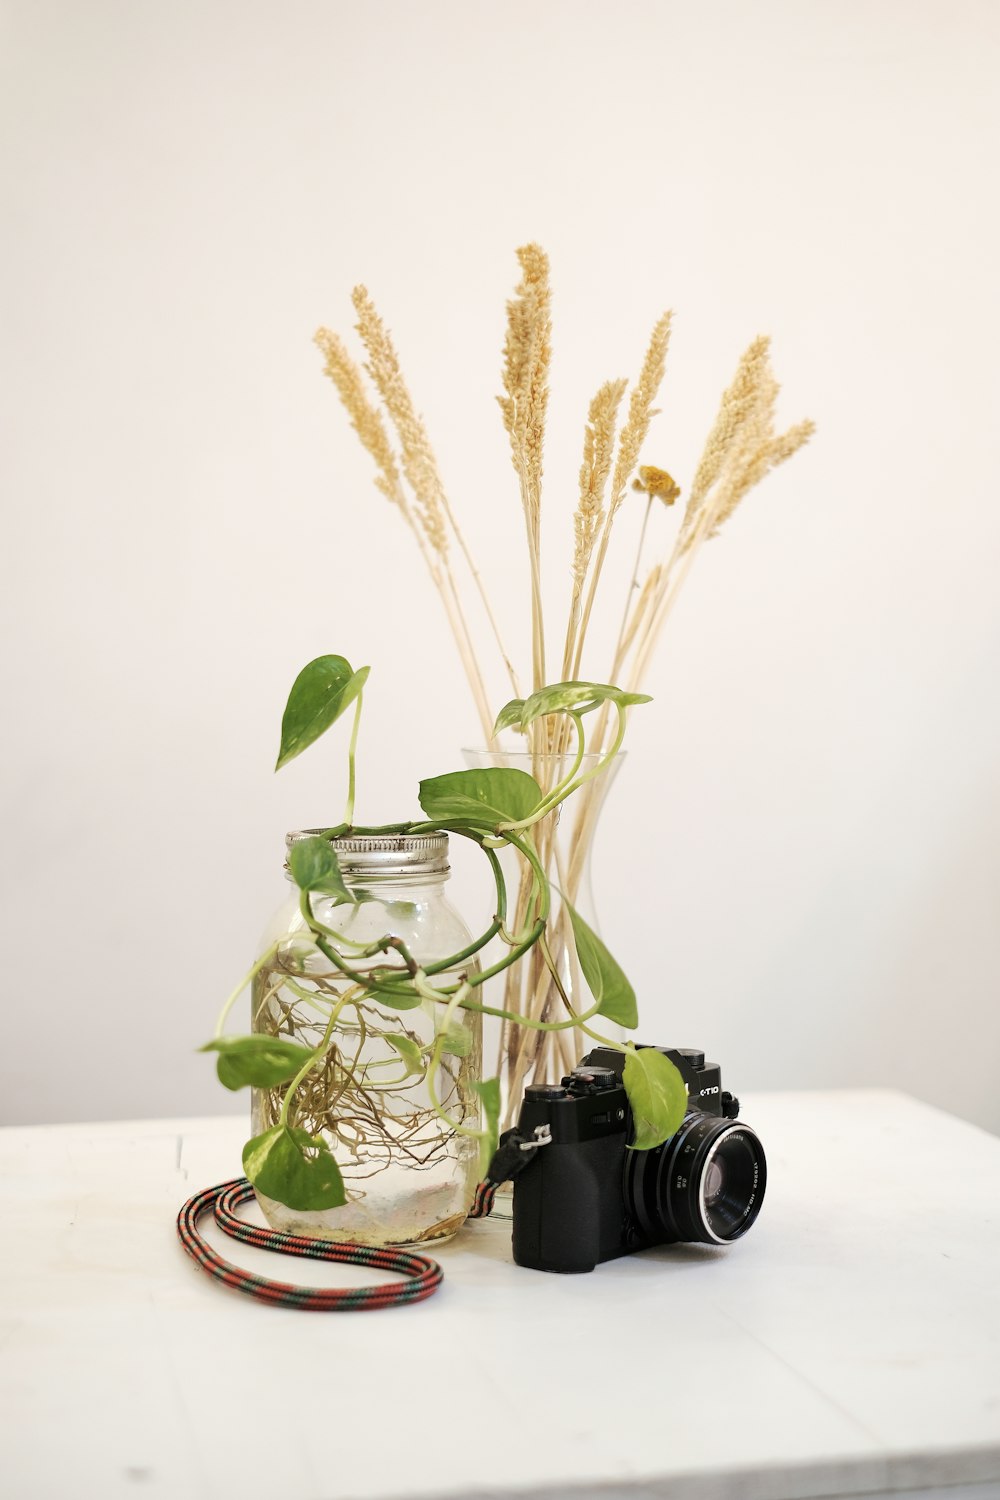 DSLR camera and plant on table